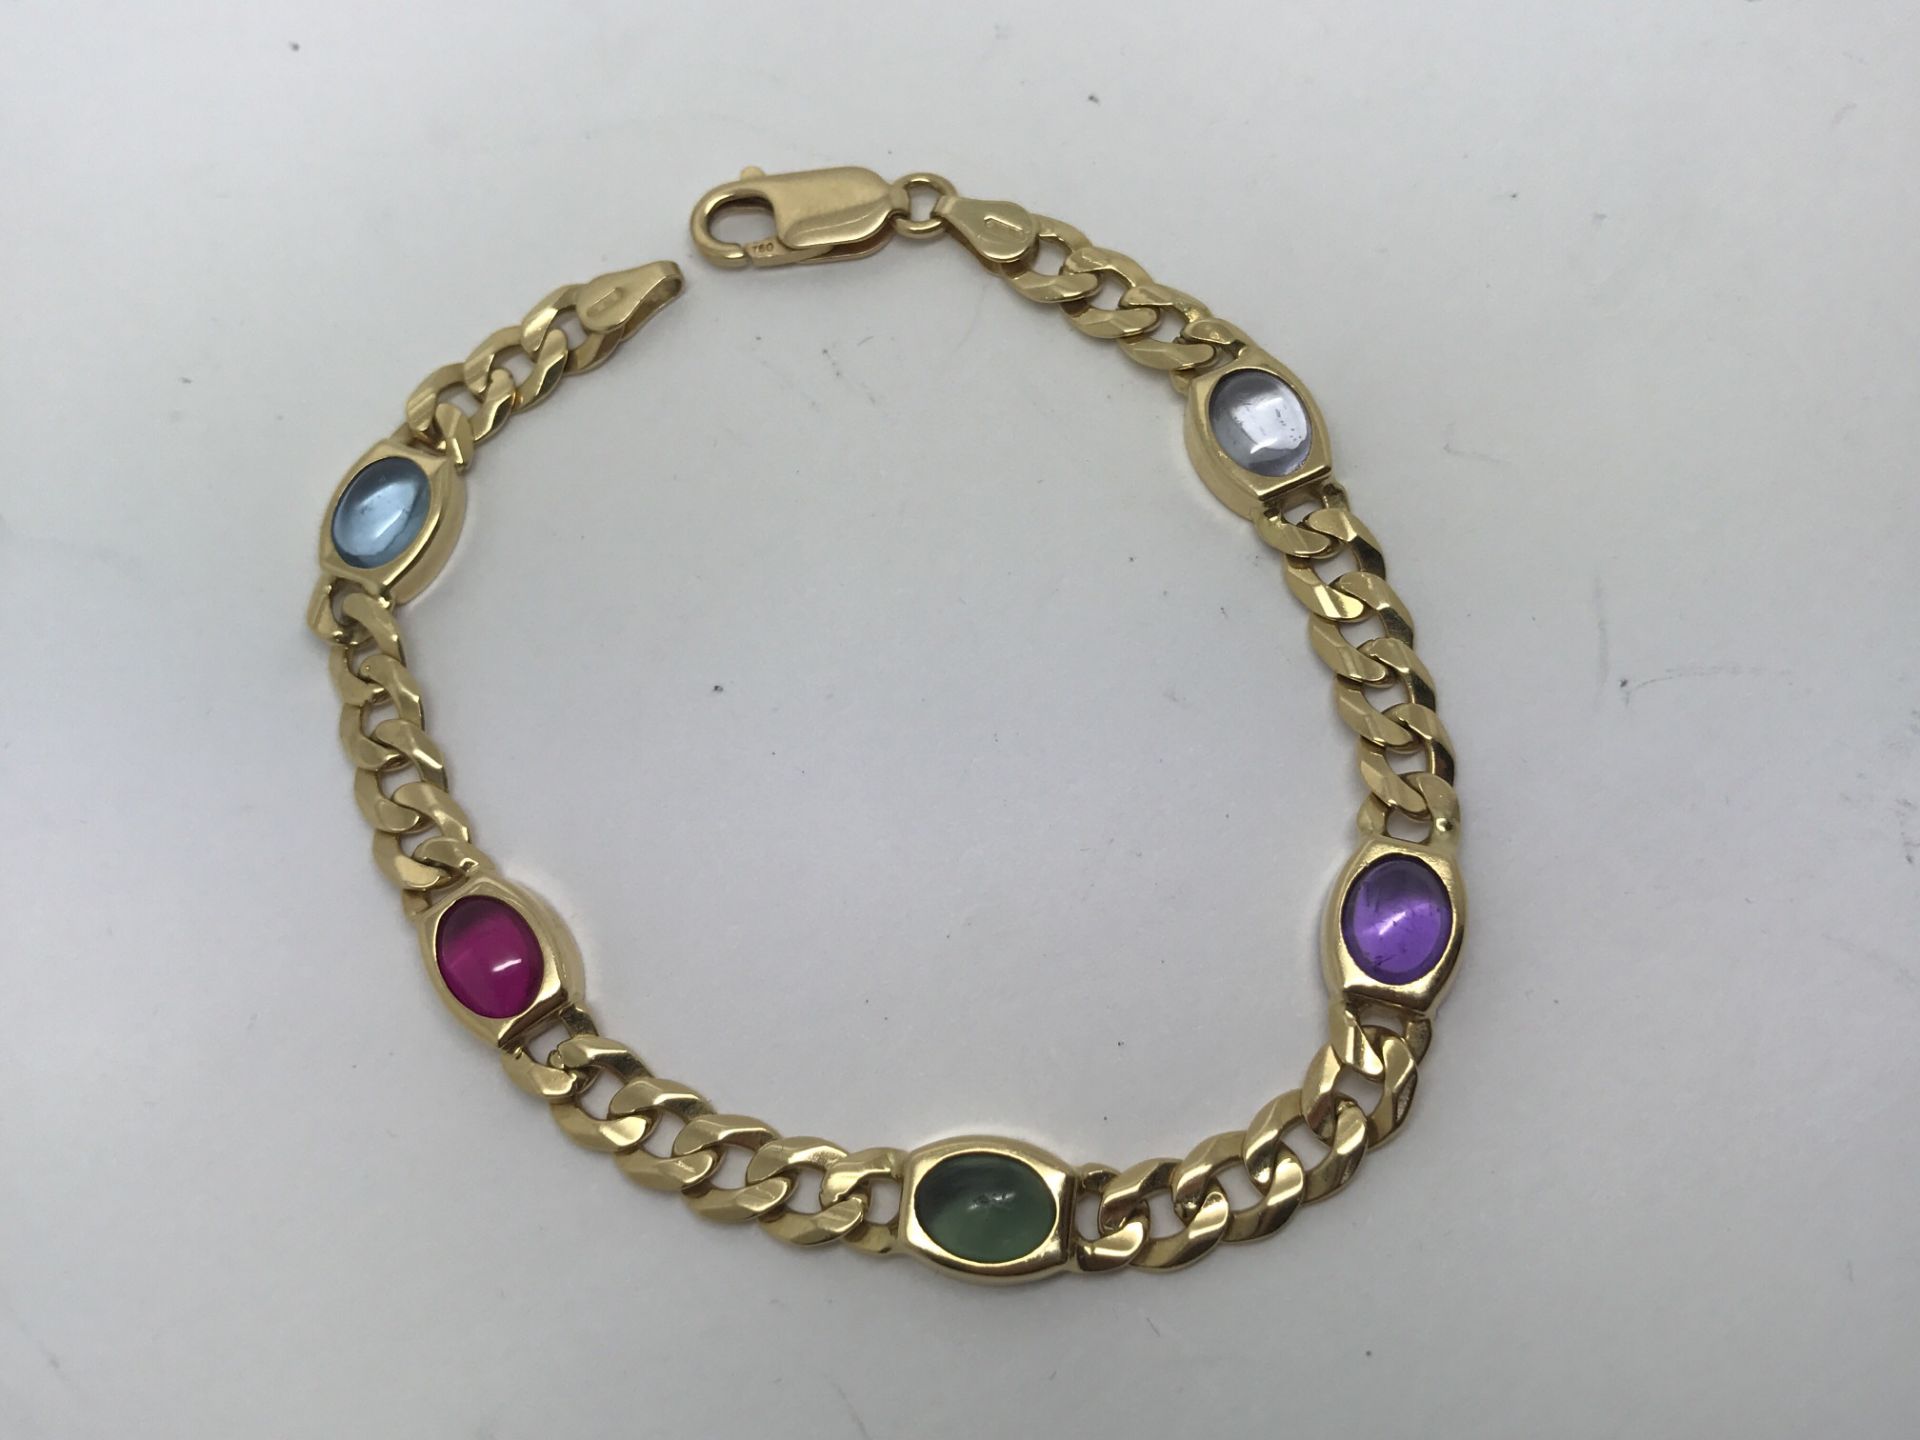 BVLGARI STYLE GEM SET 18ct GOLD BRACELET - WEIGHS APPROX 14.9 GRAMS - Image 2 of 2